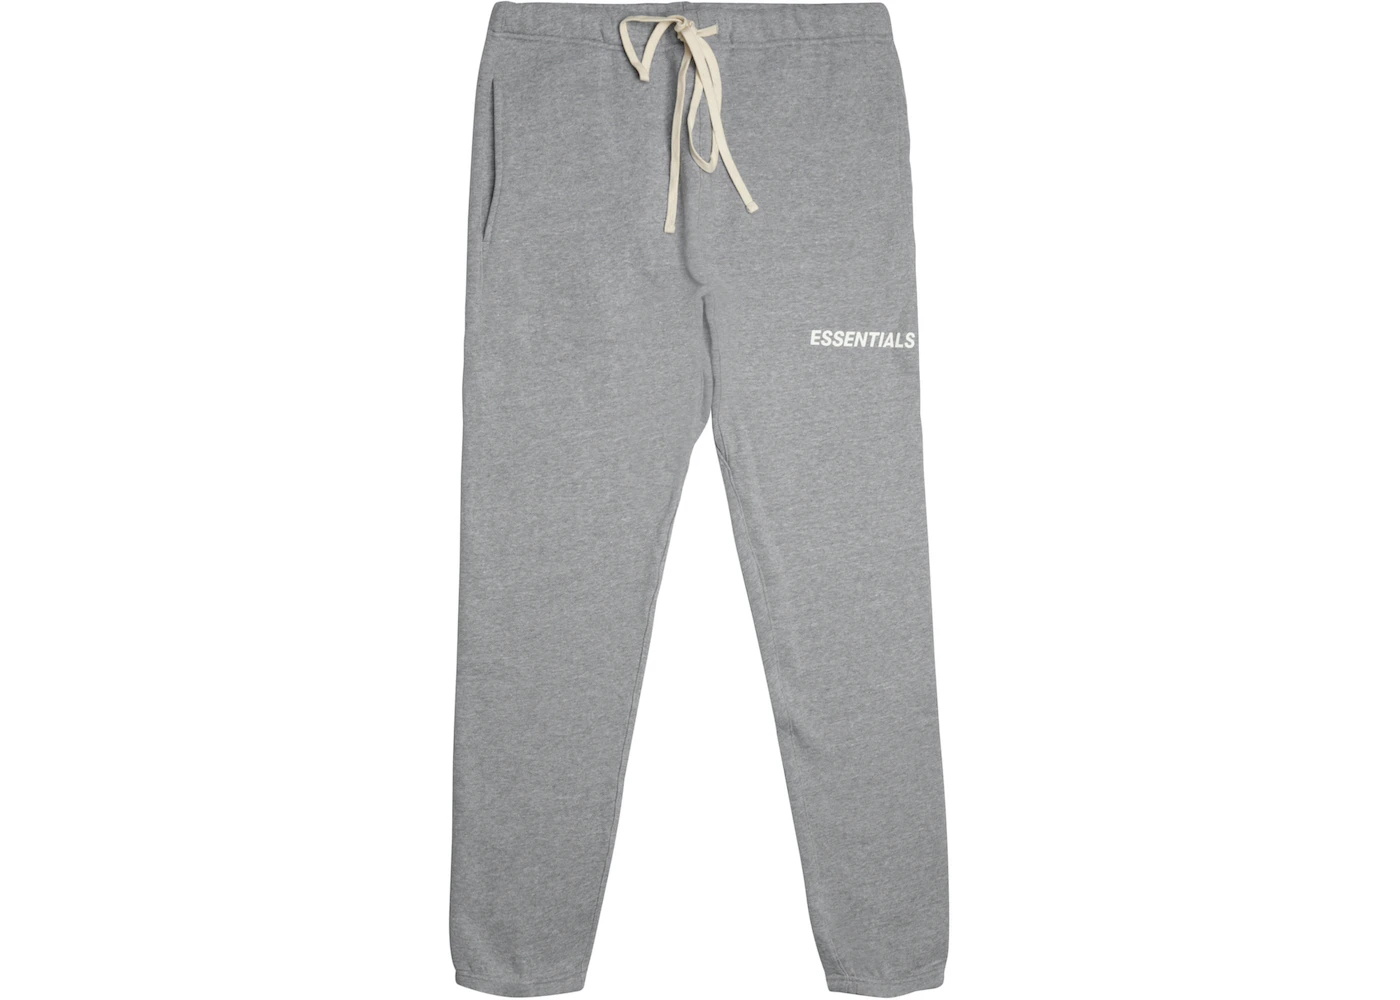 Fear of God Essentials Graphic Sweatpants Grey/White - FW18 - US